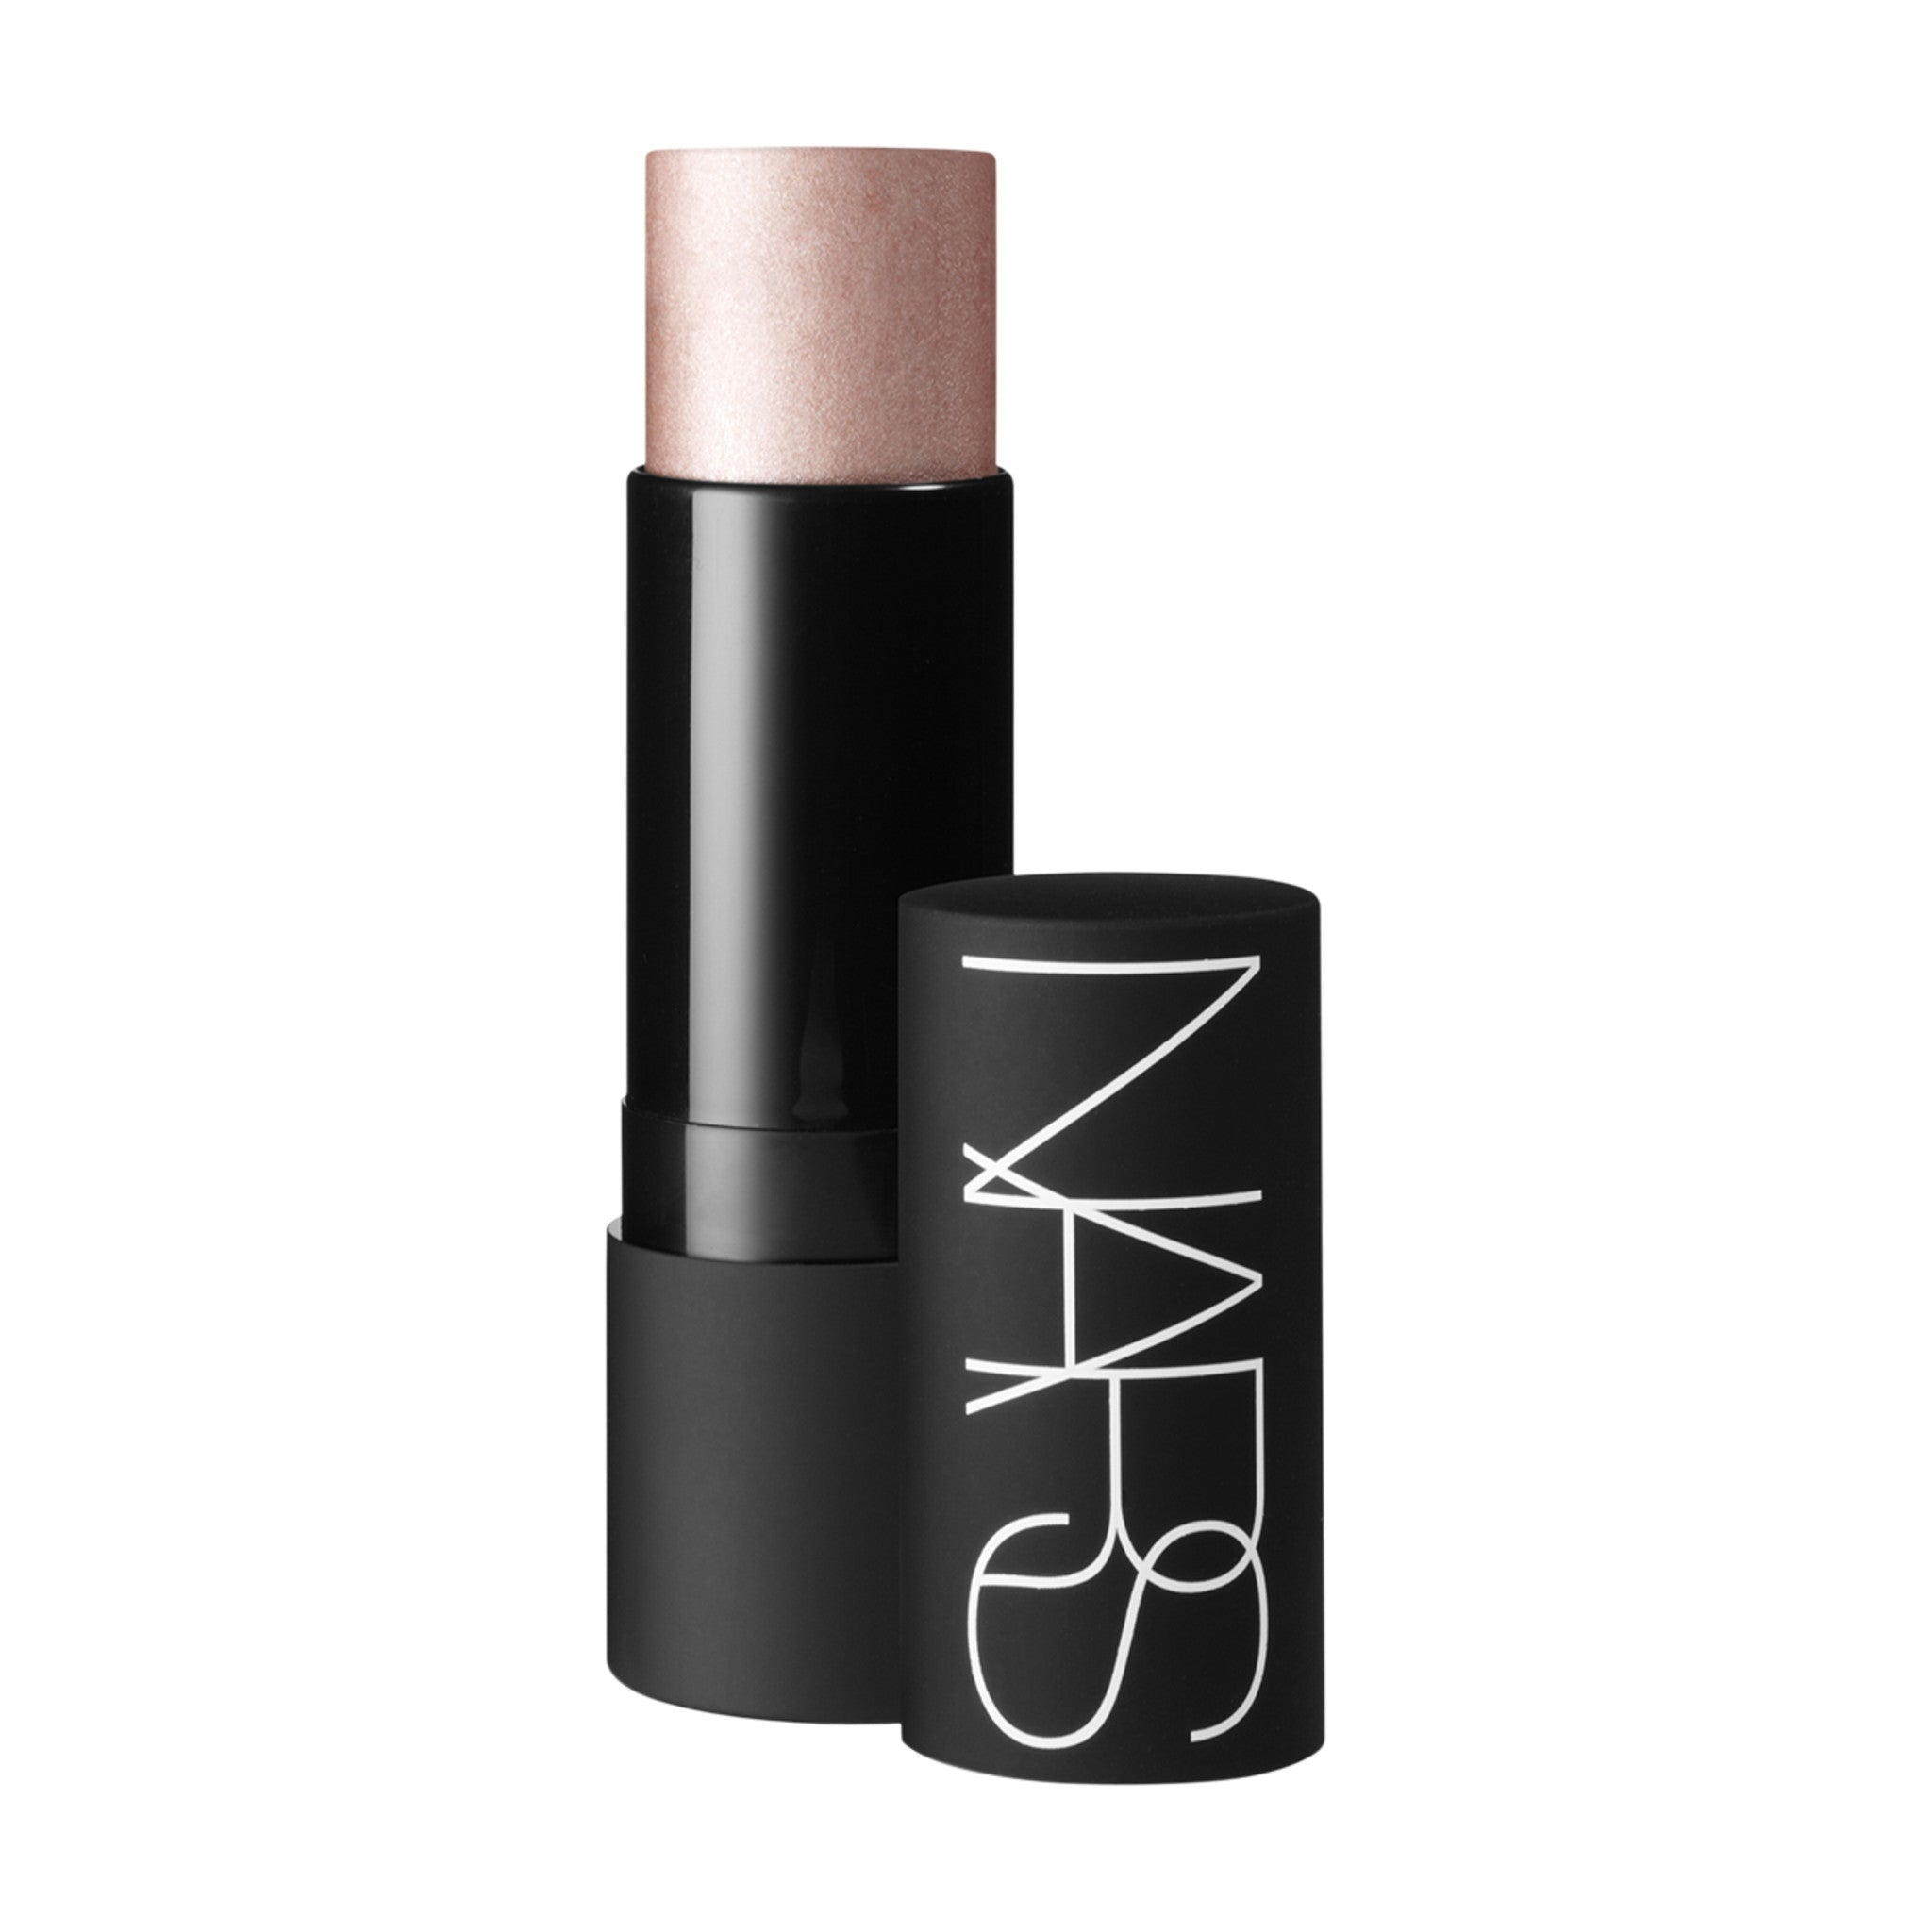 Nars The Multiple (Limited Edition) Color/Shade variant: Copacabana main image. This product is in the color orange